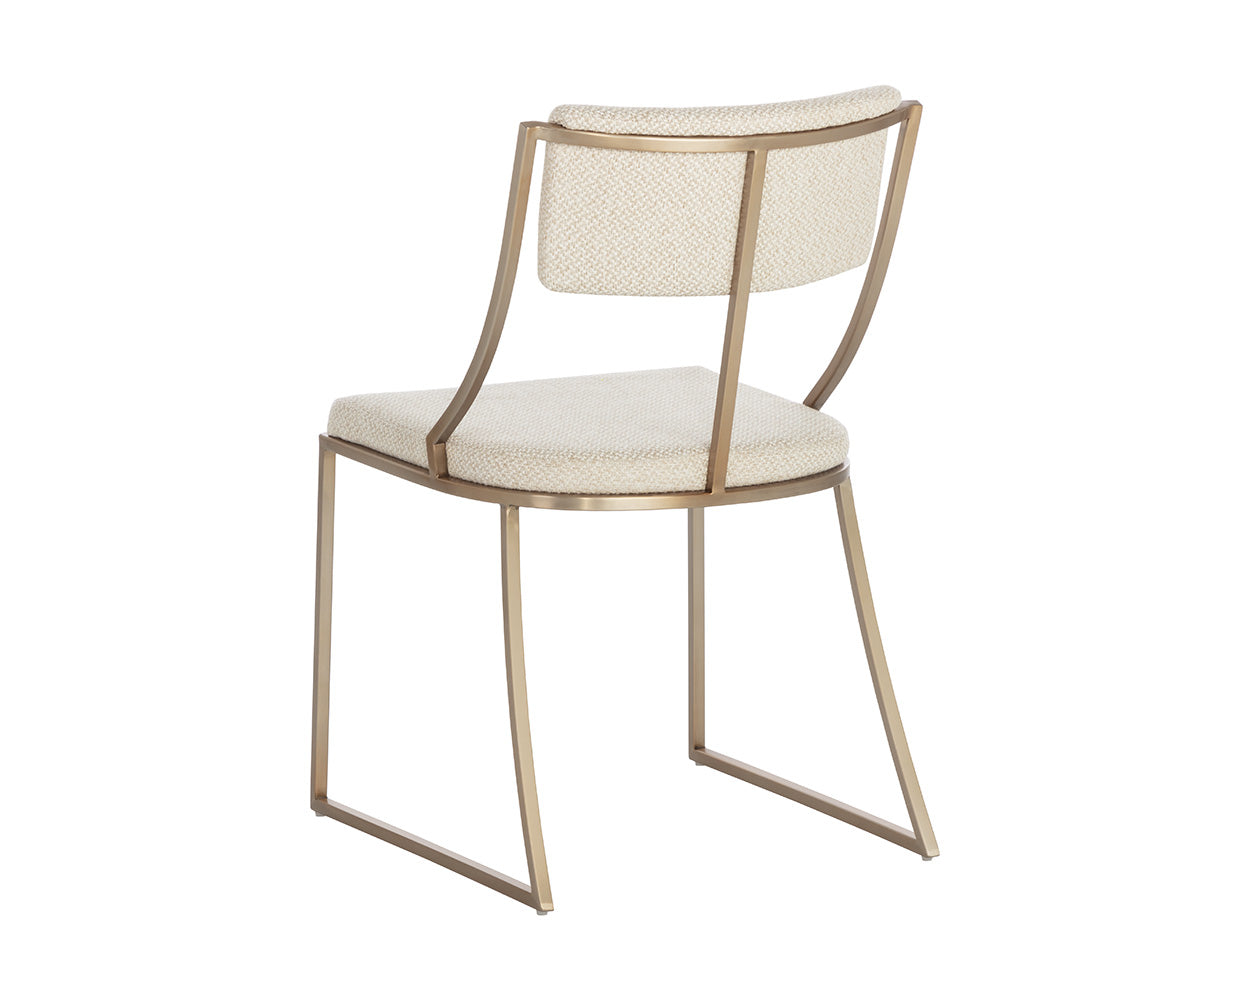 Makena Dining Chair